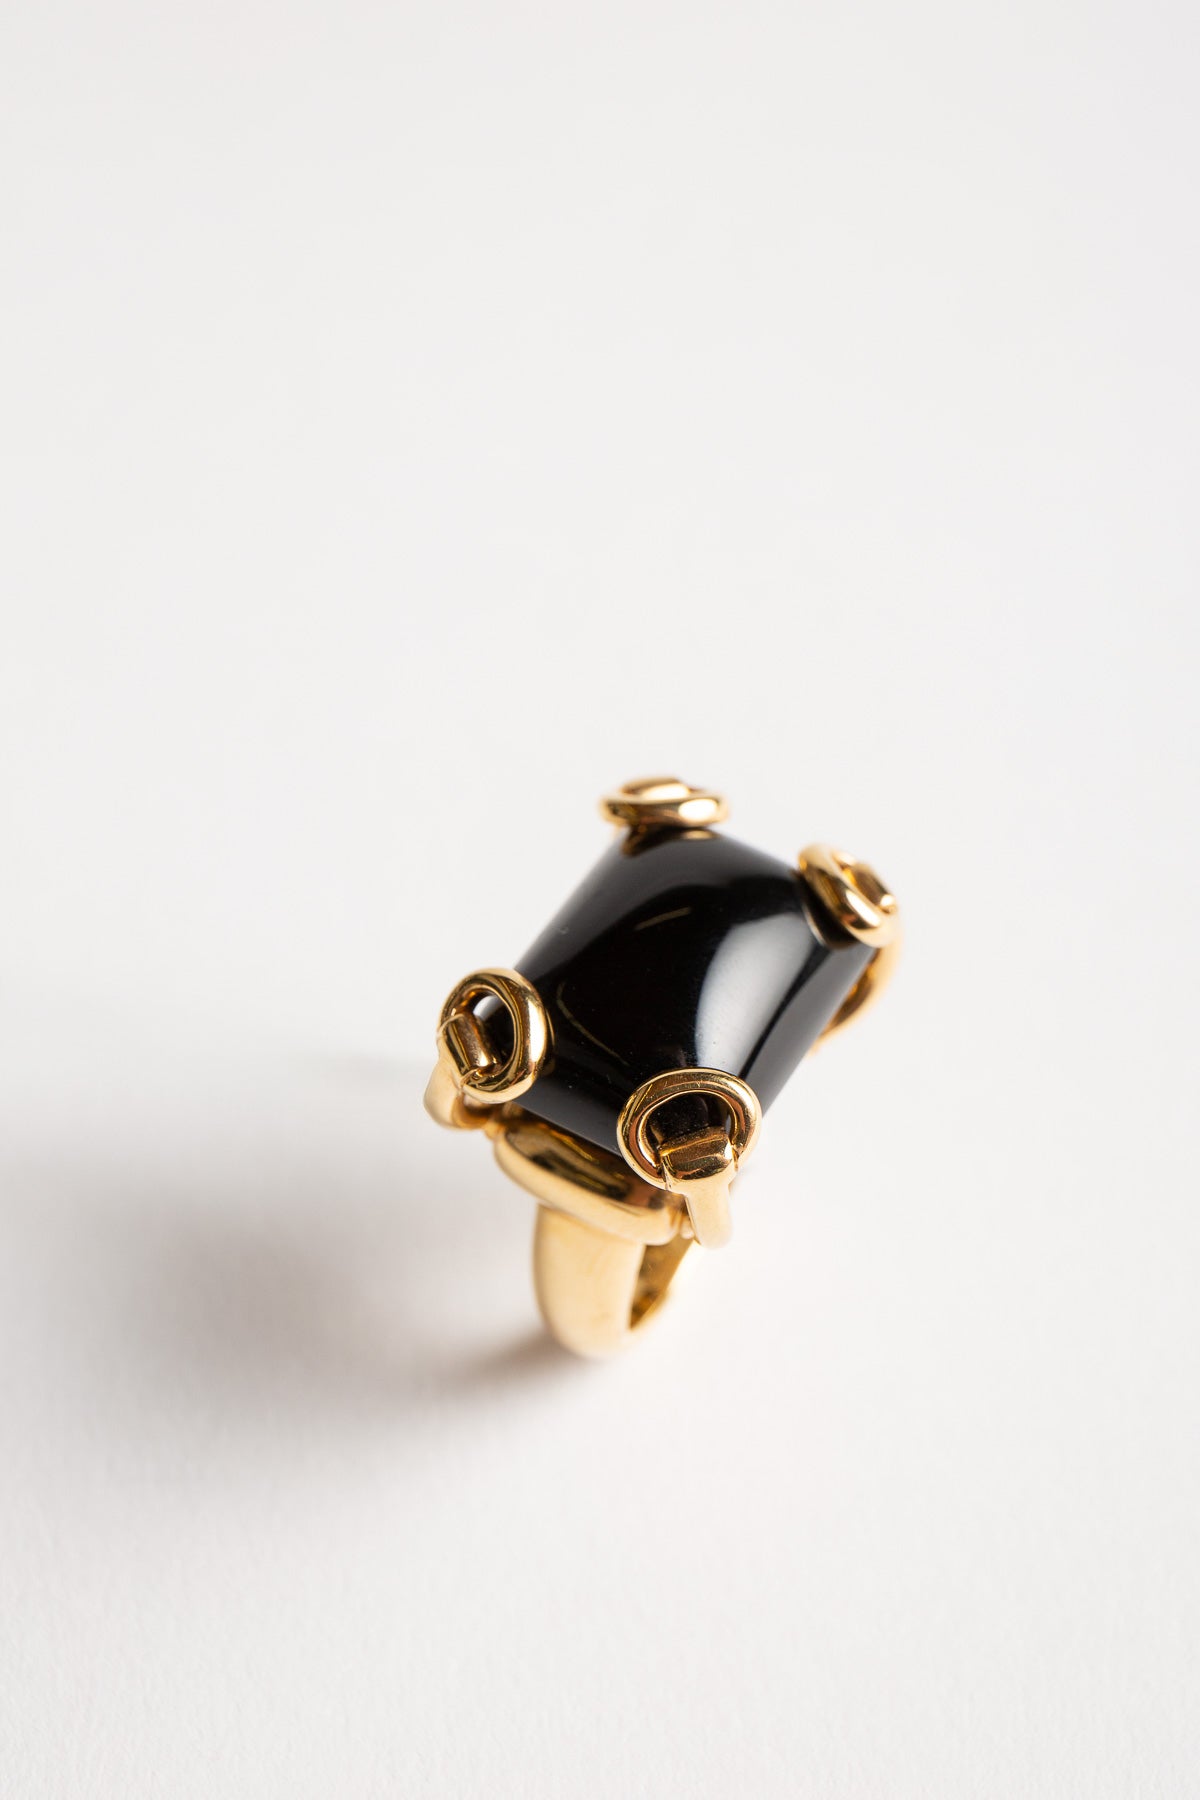 MAXFIELD PRIVATE COLLECTION | 1960'S ONYX RING